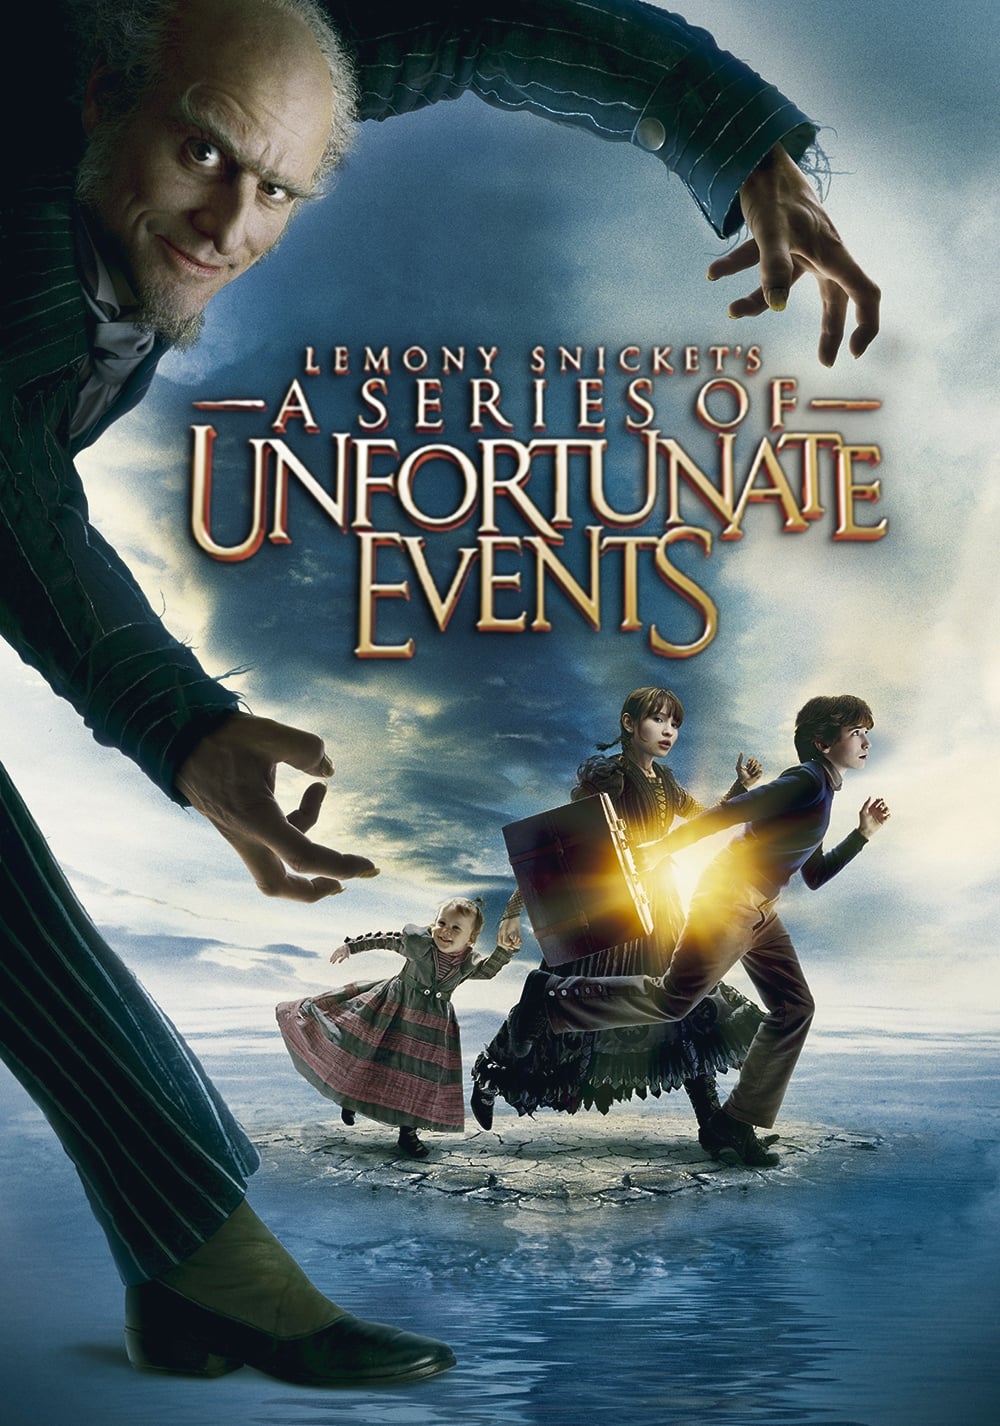 Lemony Snicket's A Series of Unfortunate Events (2004) The Poster